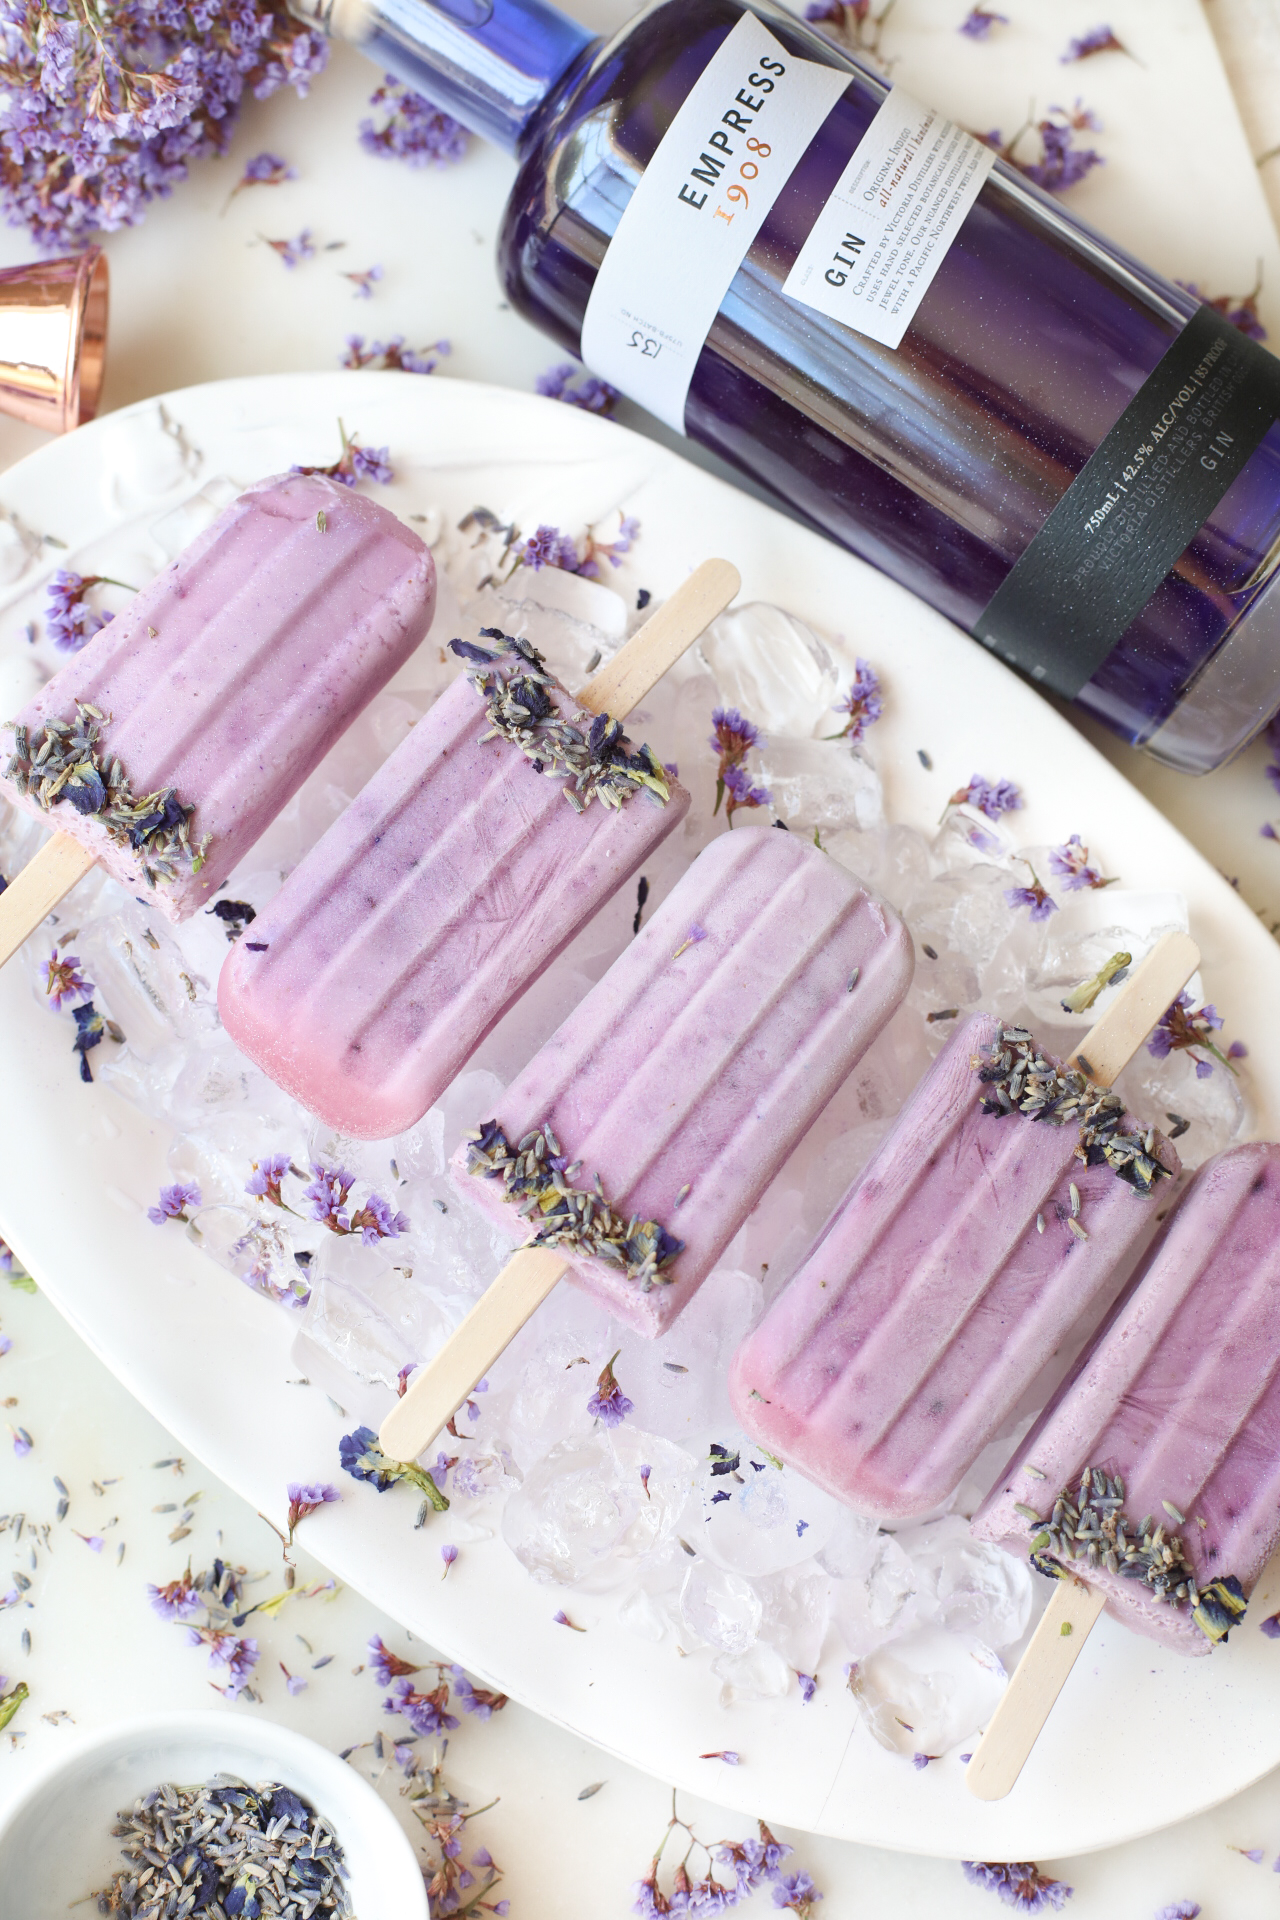 Boozy Lavender Blueberry Creamsicles made with Empress Gin. #creamsicles #dessert #lavender #blueberry #gin